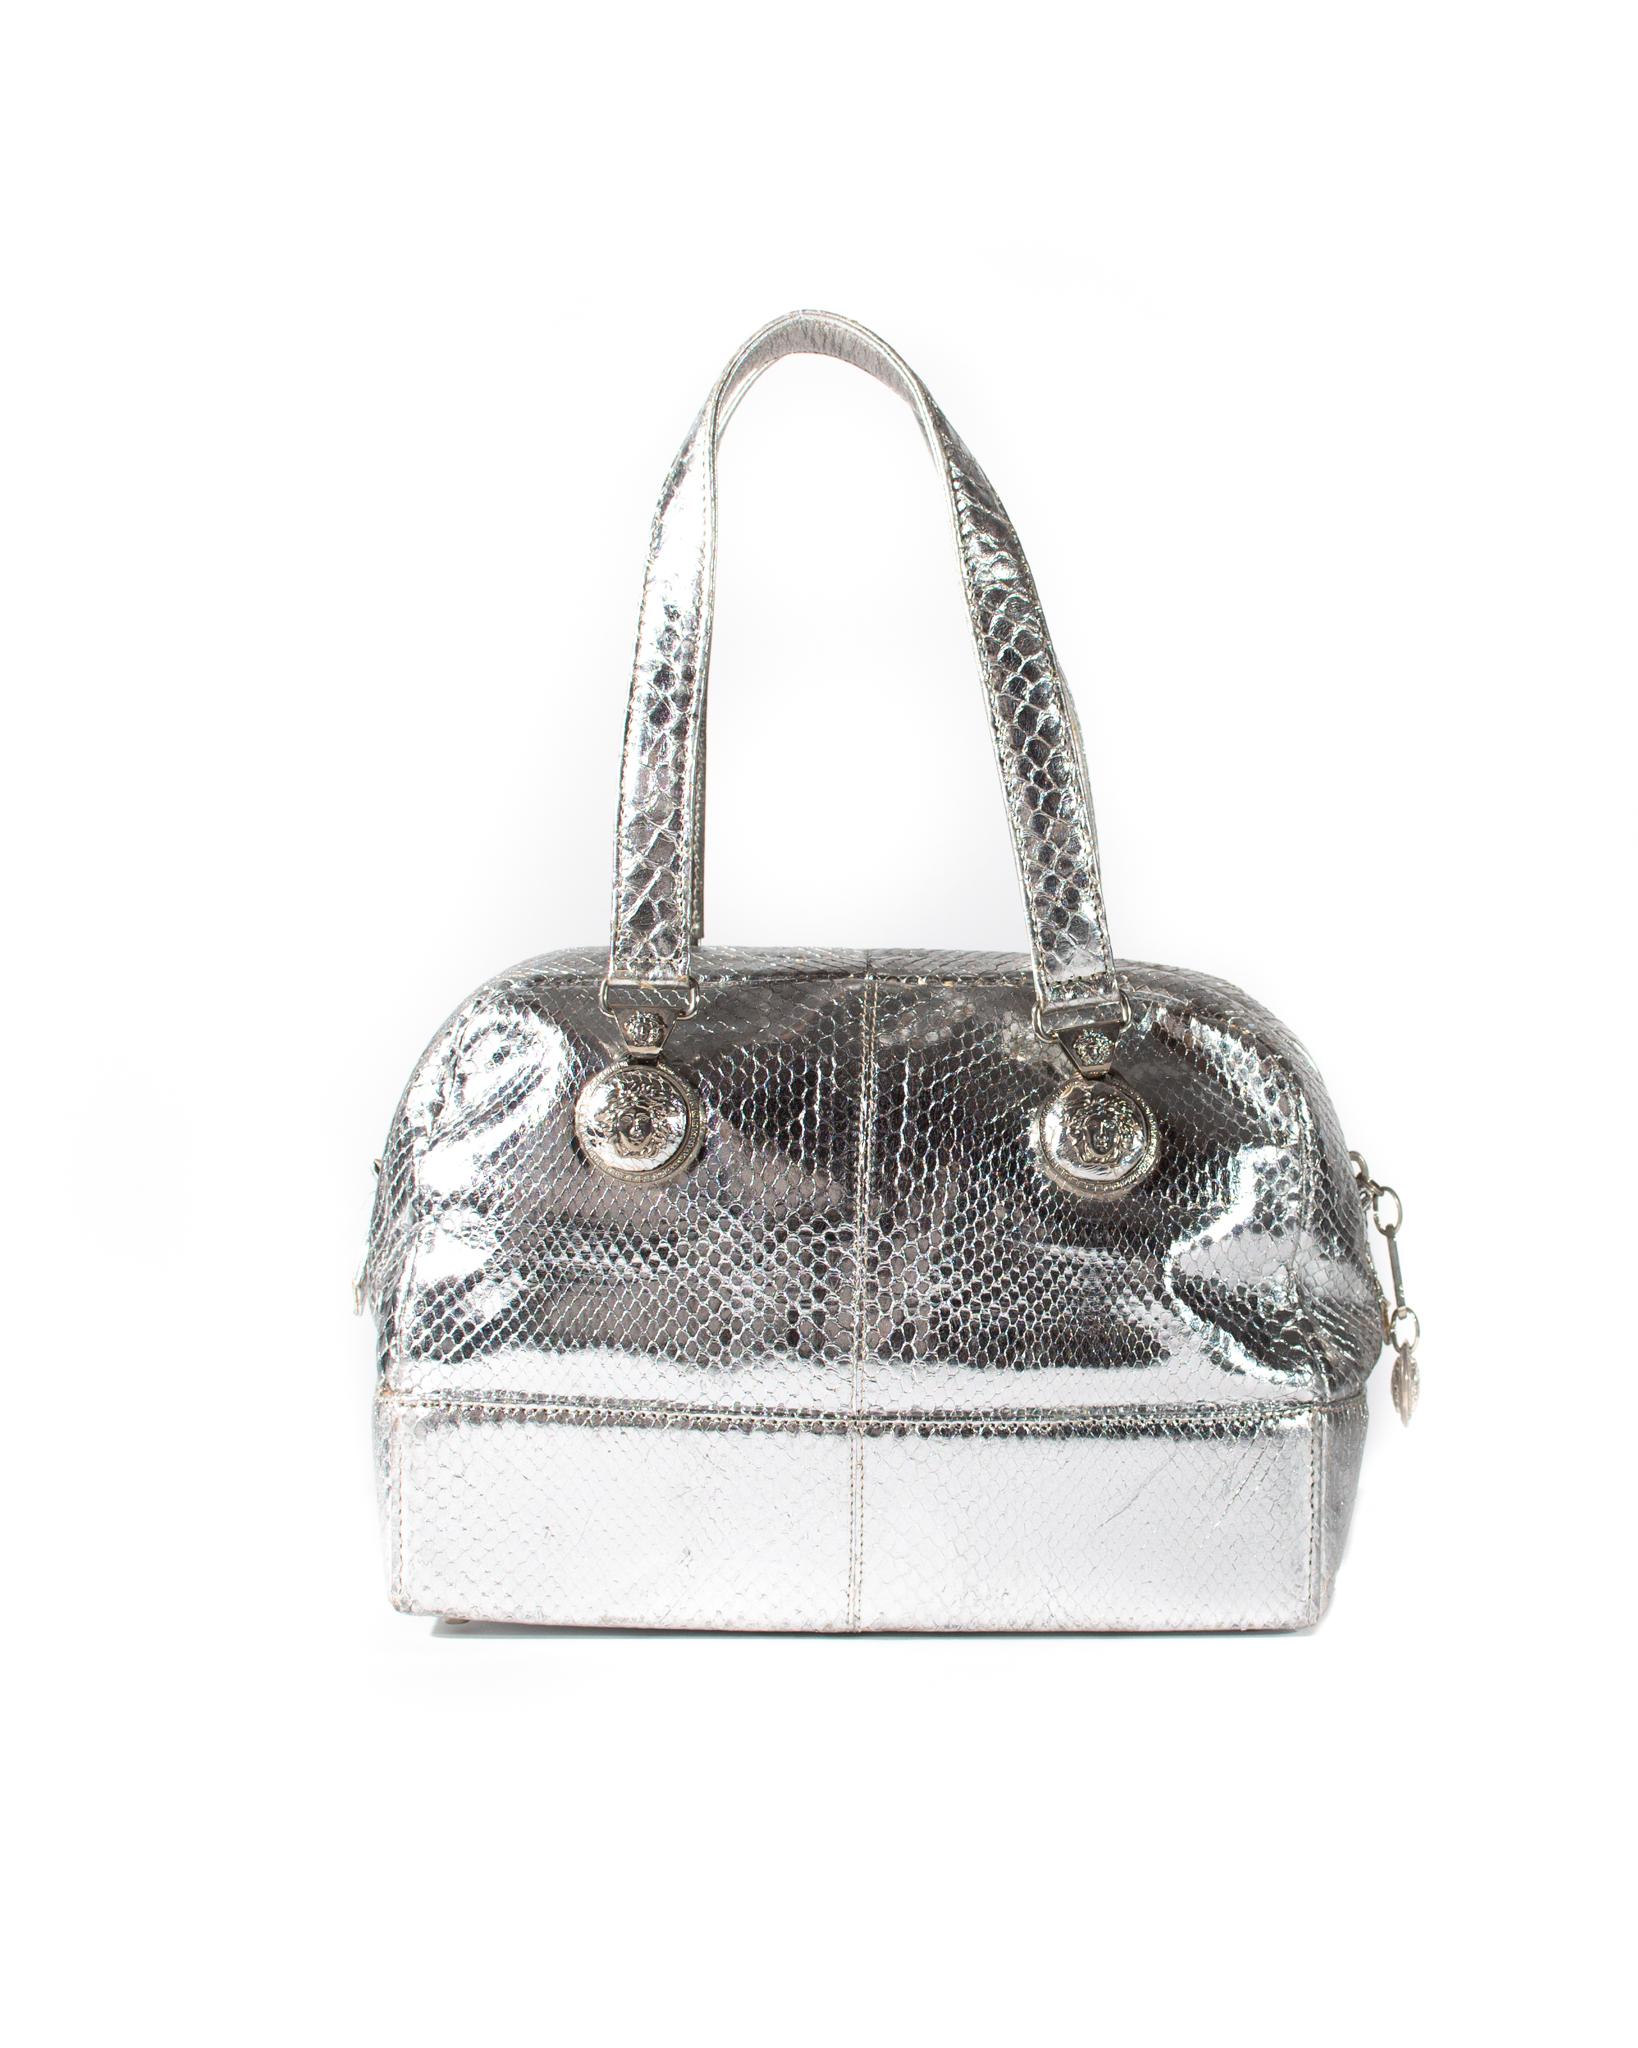 F/W 1994 Vintage Gianni Versace Silver Metallic Python Medusa Shoulder Bag  In Good Condition For Sale In West Hollywood, CA